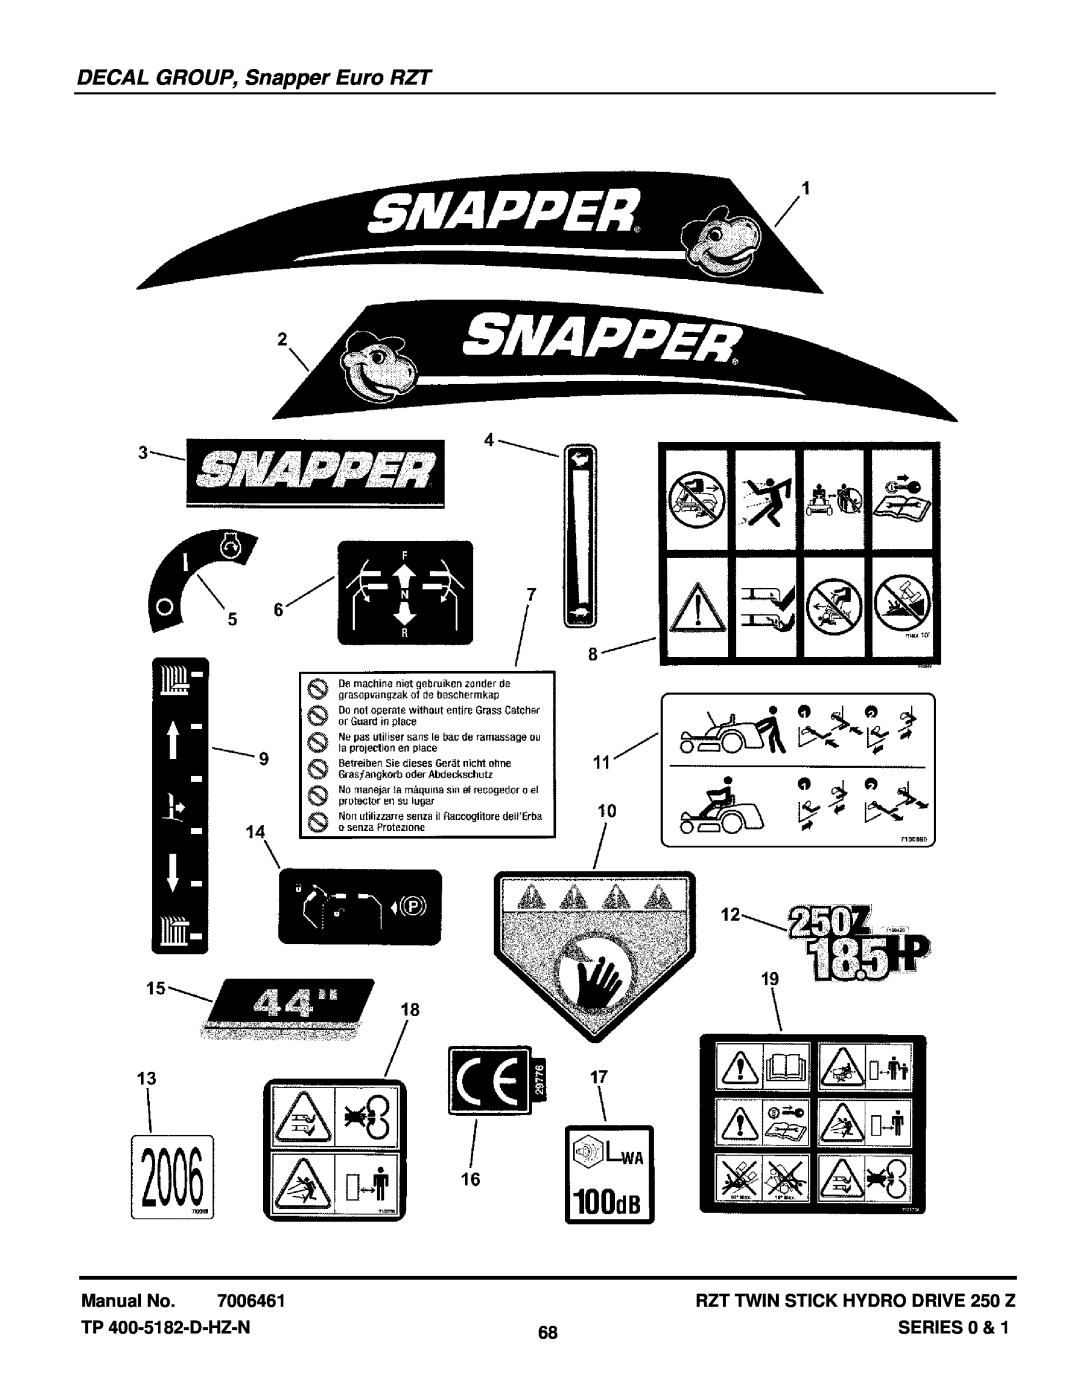 Snapper ERZT185440BVE, ERZT20441BVE2, RZT22500BVE2, RZT22501BVE2 manual DECAL GROUP, Snapper Euro RZT, Manual No, 7006461 